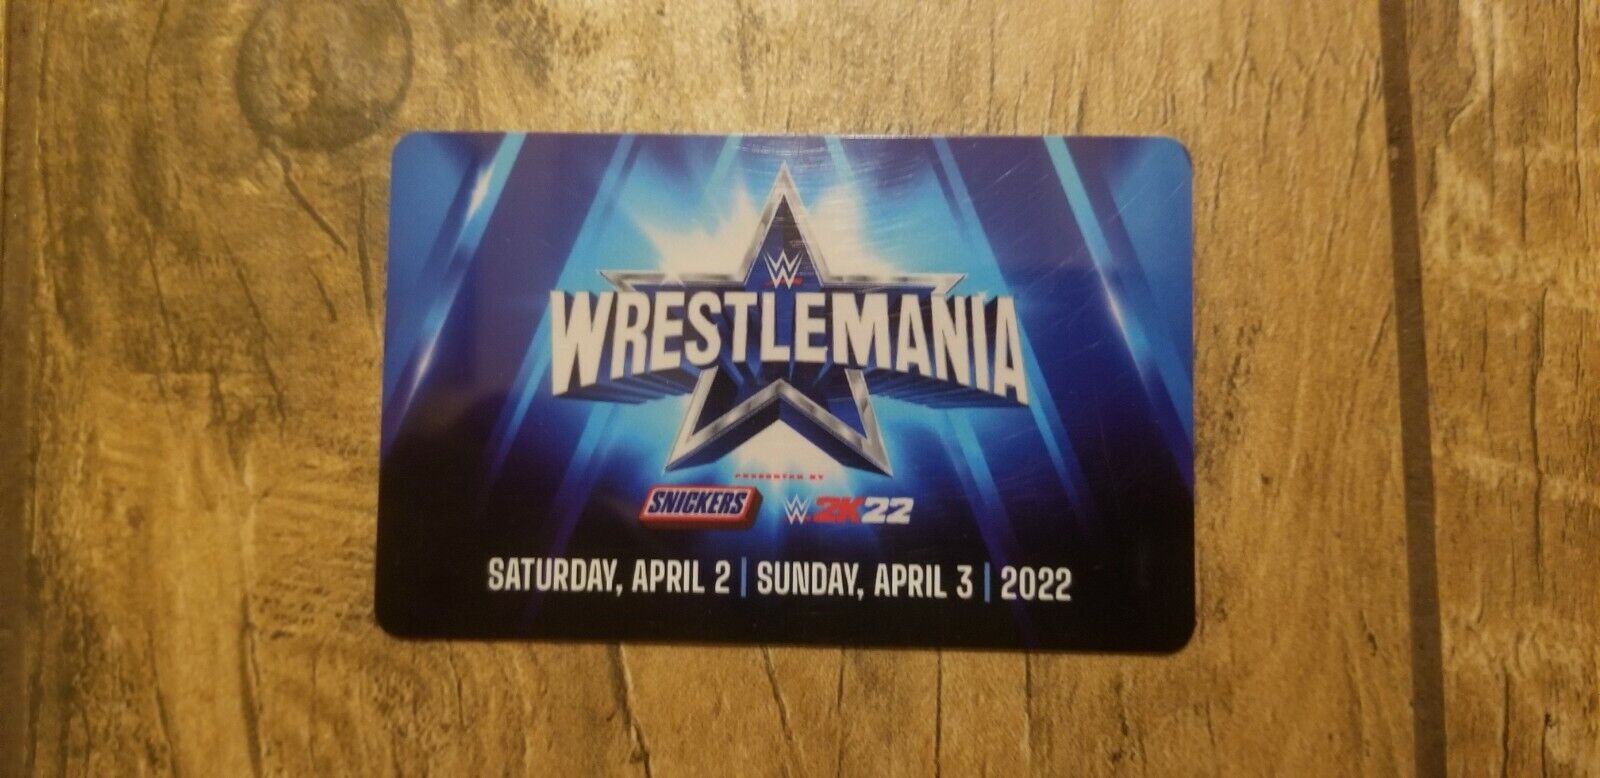 2022 OFFICIAL WWE WRESTLEMANIA HOST HOTEL ROOM KEY Only Issued to Wrestlers 